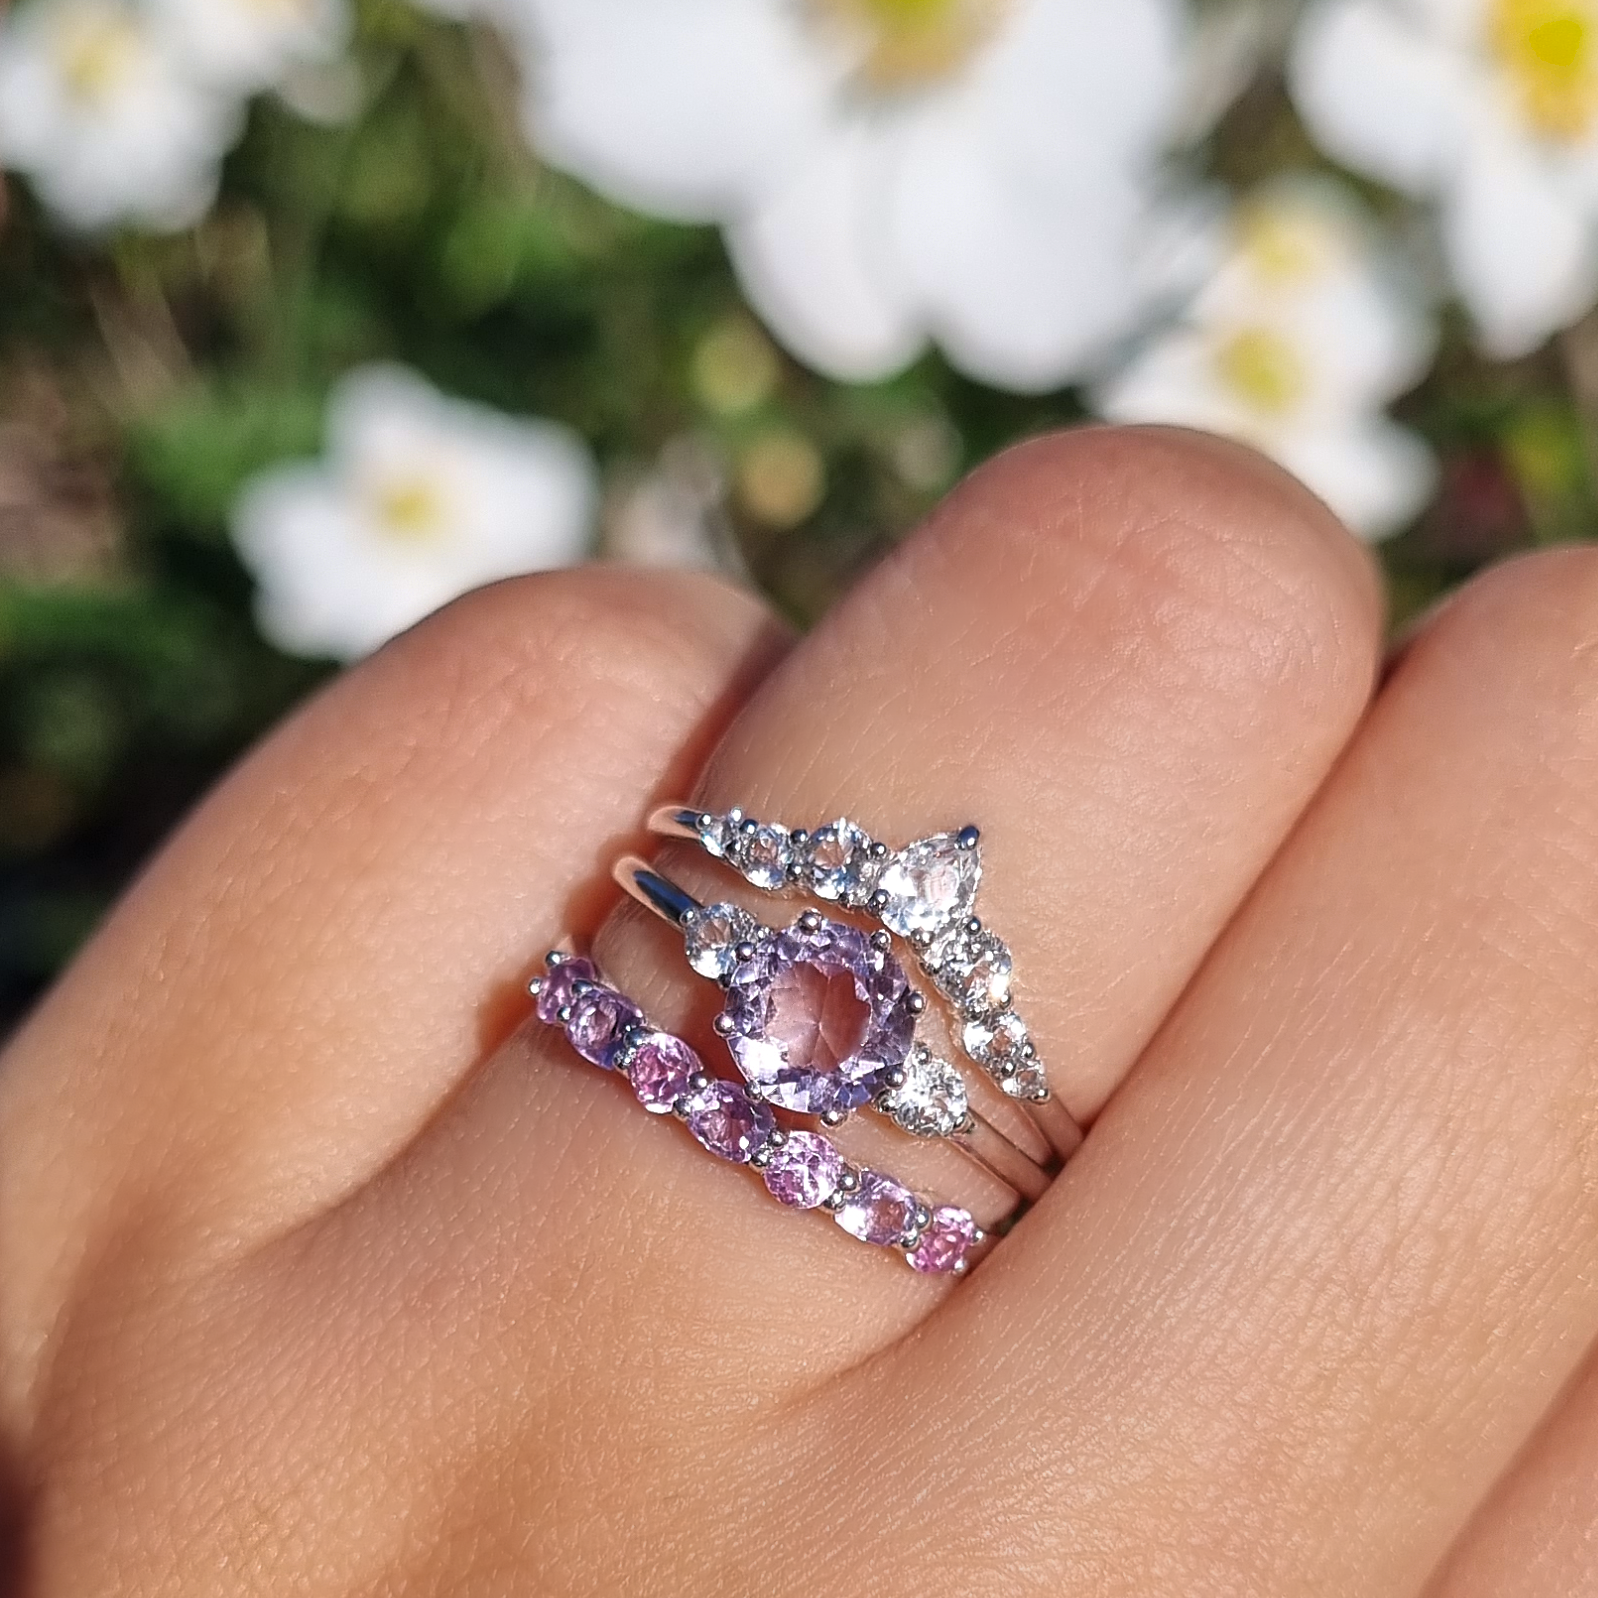 Lavender Amethyst Ring Sterling Silver Ring Set, Engagement & Promise Ring Stack, Classic Setting Gemstone Statement Ring, Anniversary, Birthday Gift For Her, Mum, Girlfriend, Wife, Fiance Christmas Gift, Purple gem, Dainty, Victorian, round Cut Ring